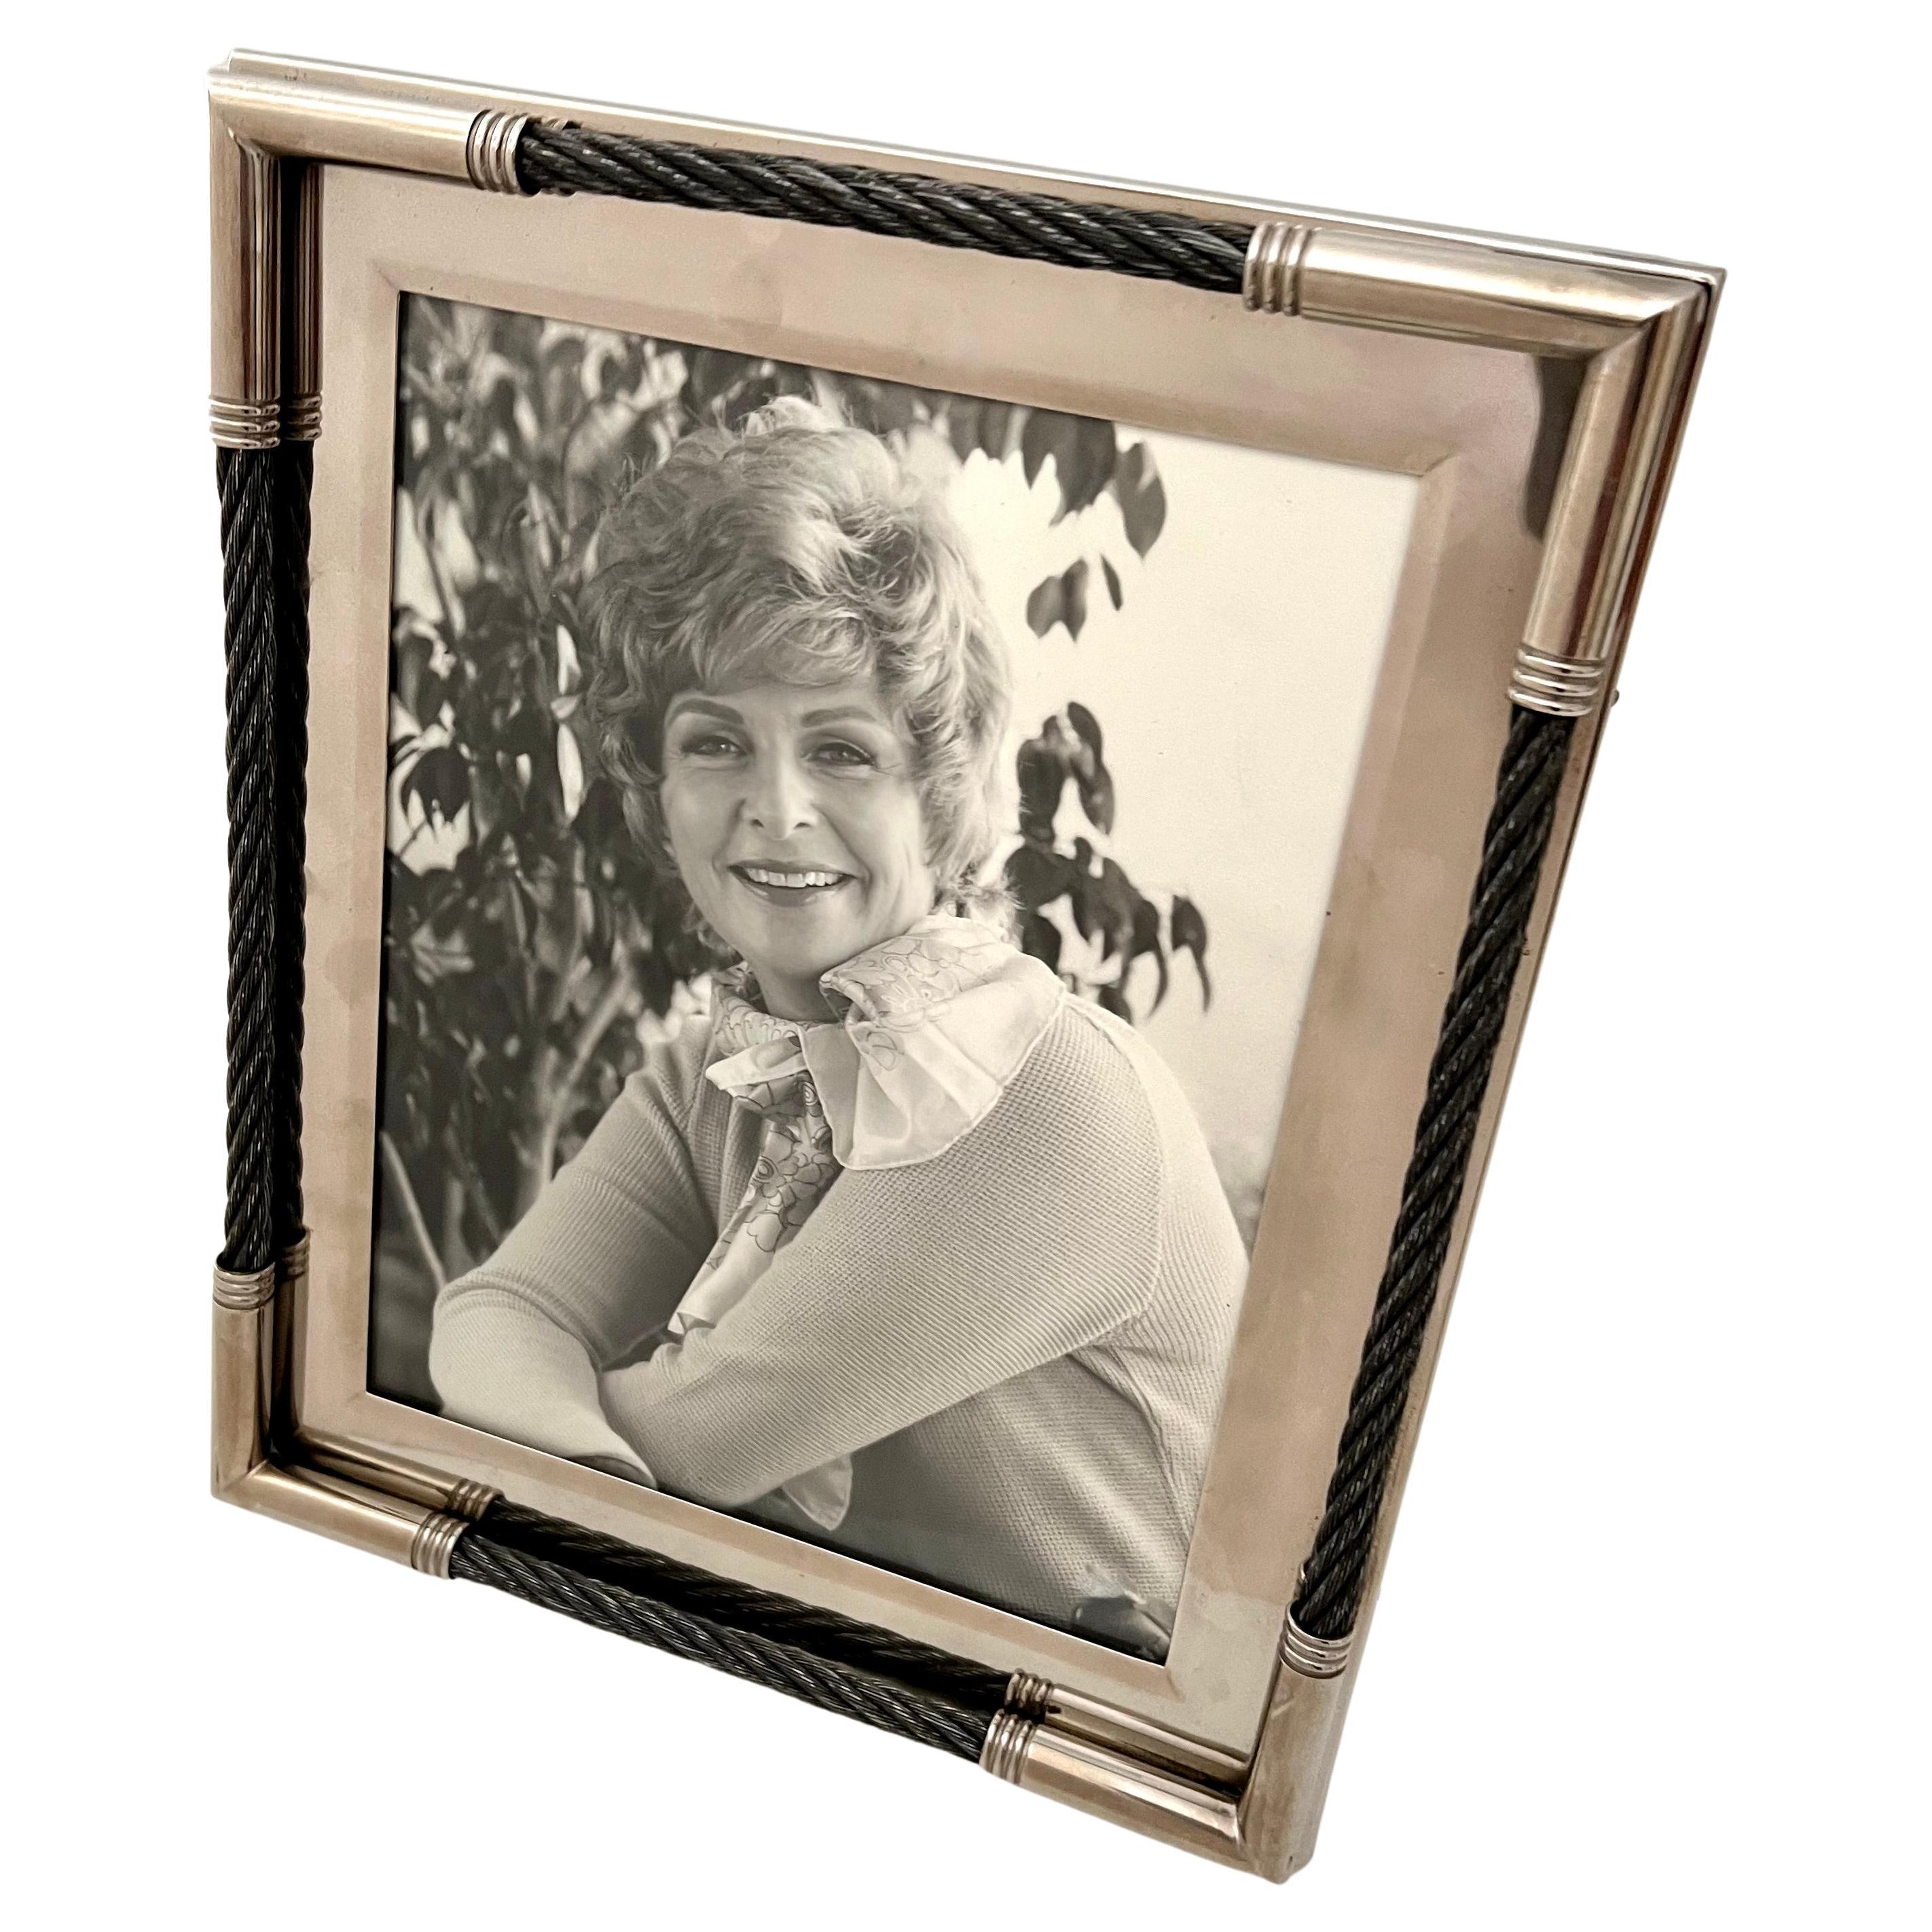 Silver Plate Picture Frame with Woven Cable Details